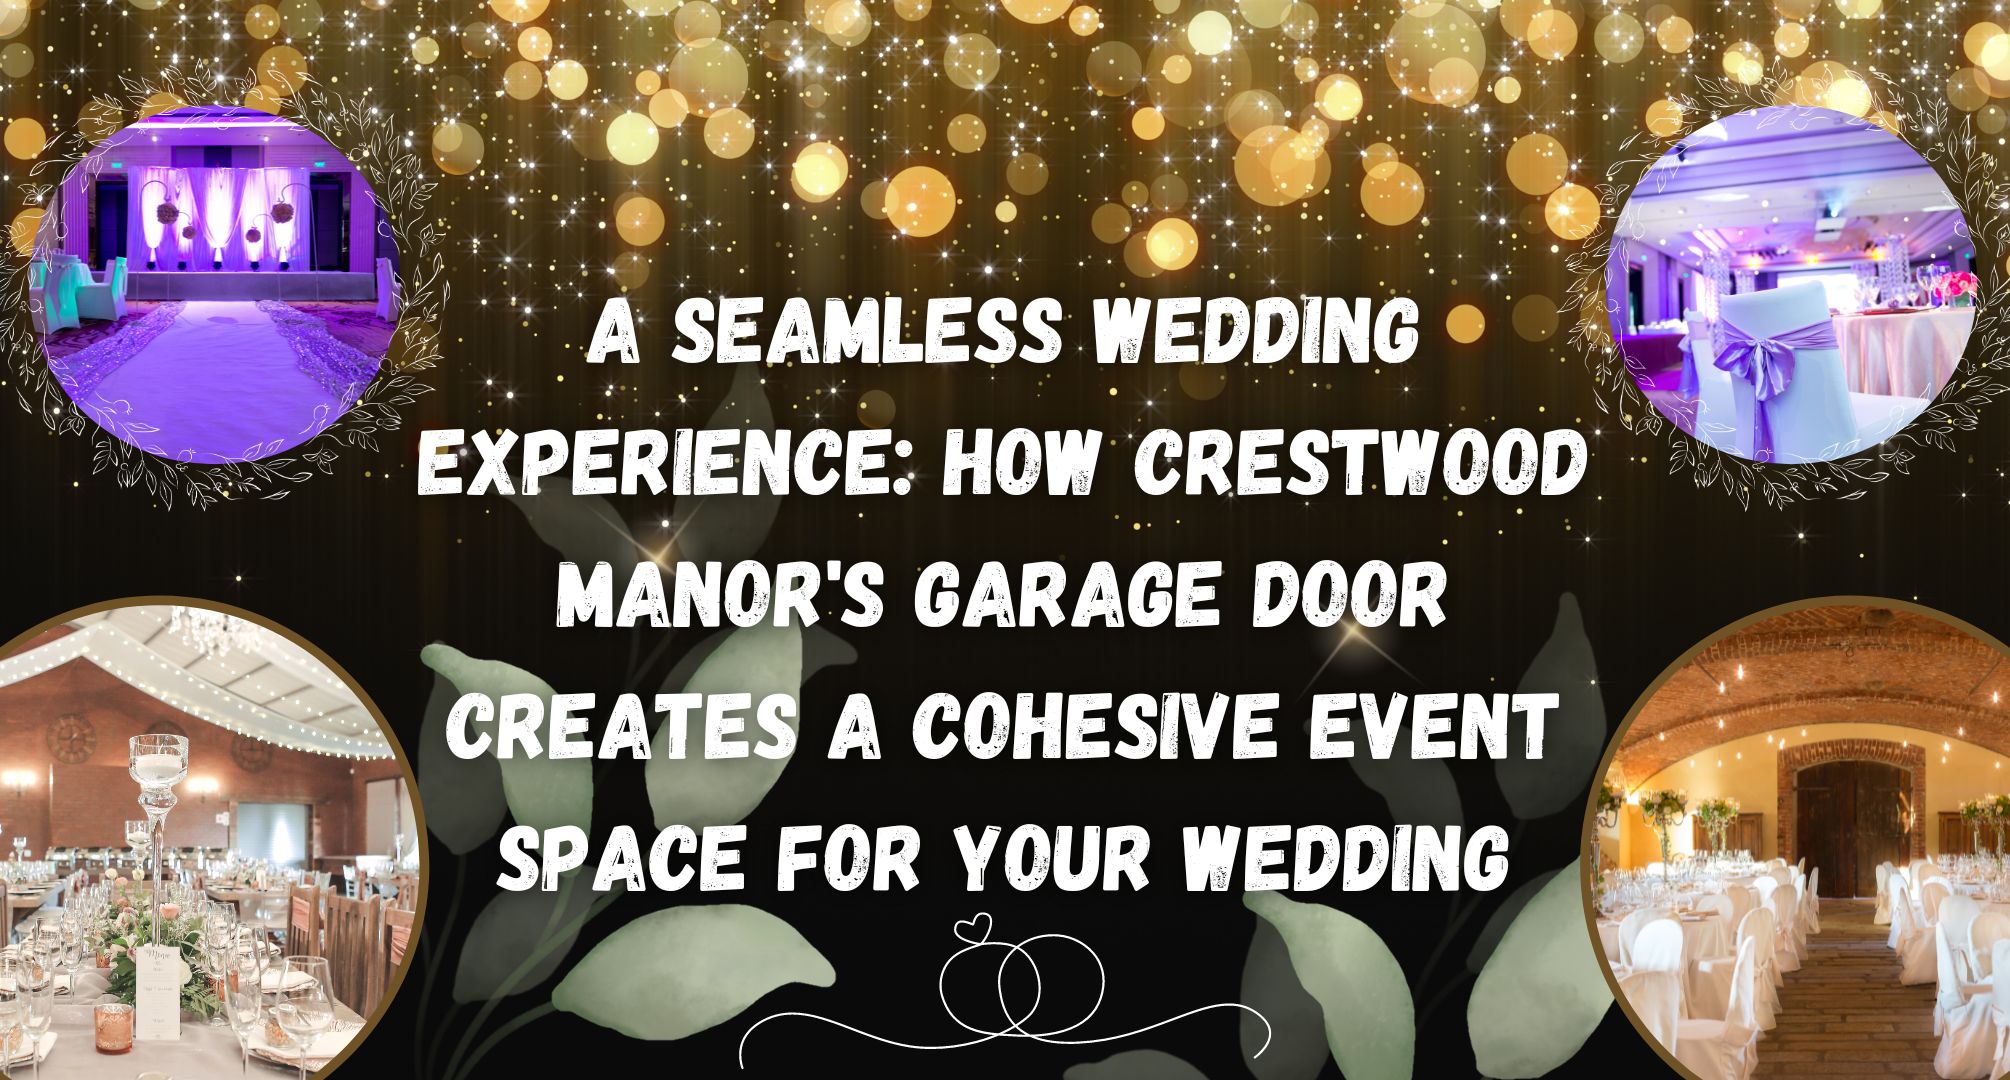 A Seamless Wedding Experience: How Crestwood Manor's Garage Door Creates a Cohesive Event Space for Your Wedding